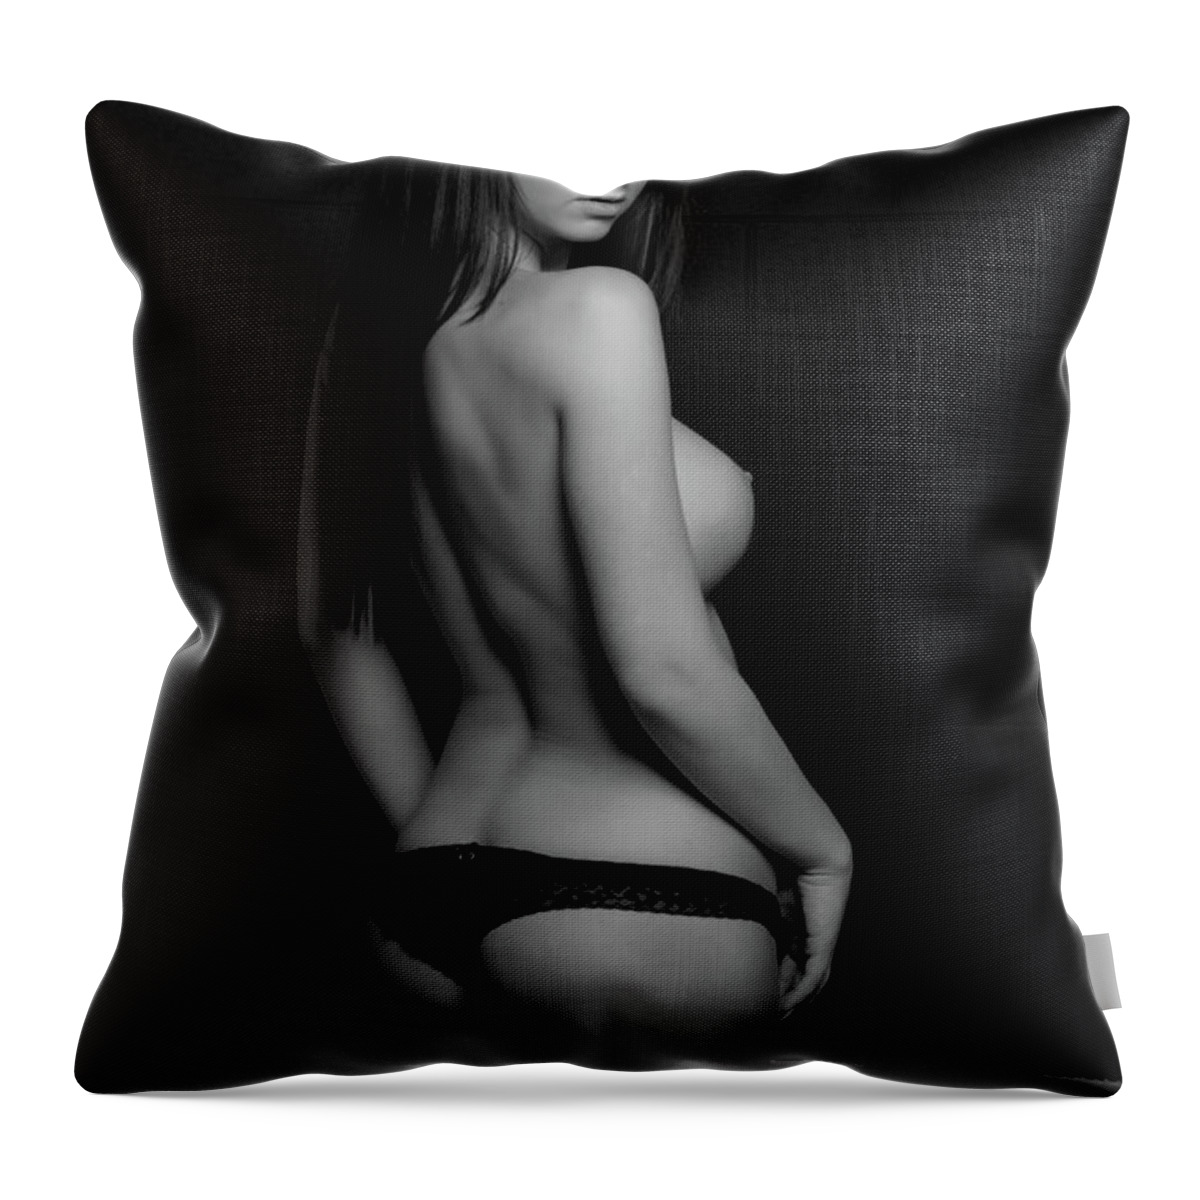 Lingerie Throw Pillow featuring the photograph Sweater And Heels by La Bella Vita Boudoir